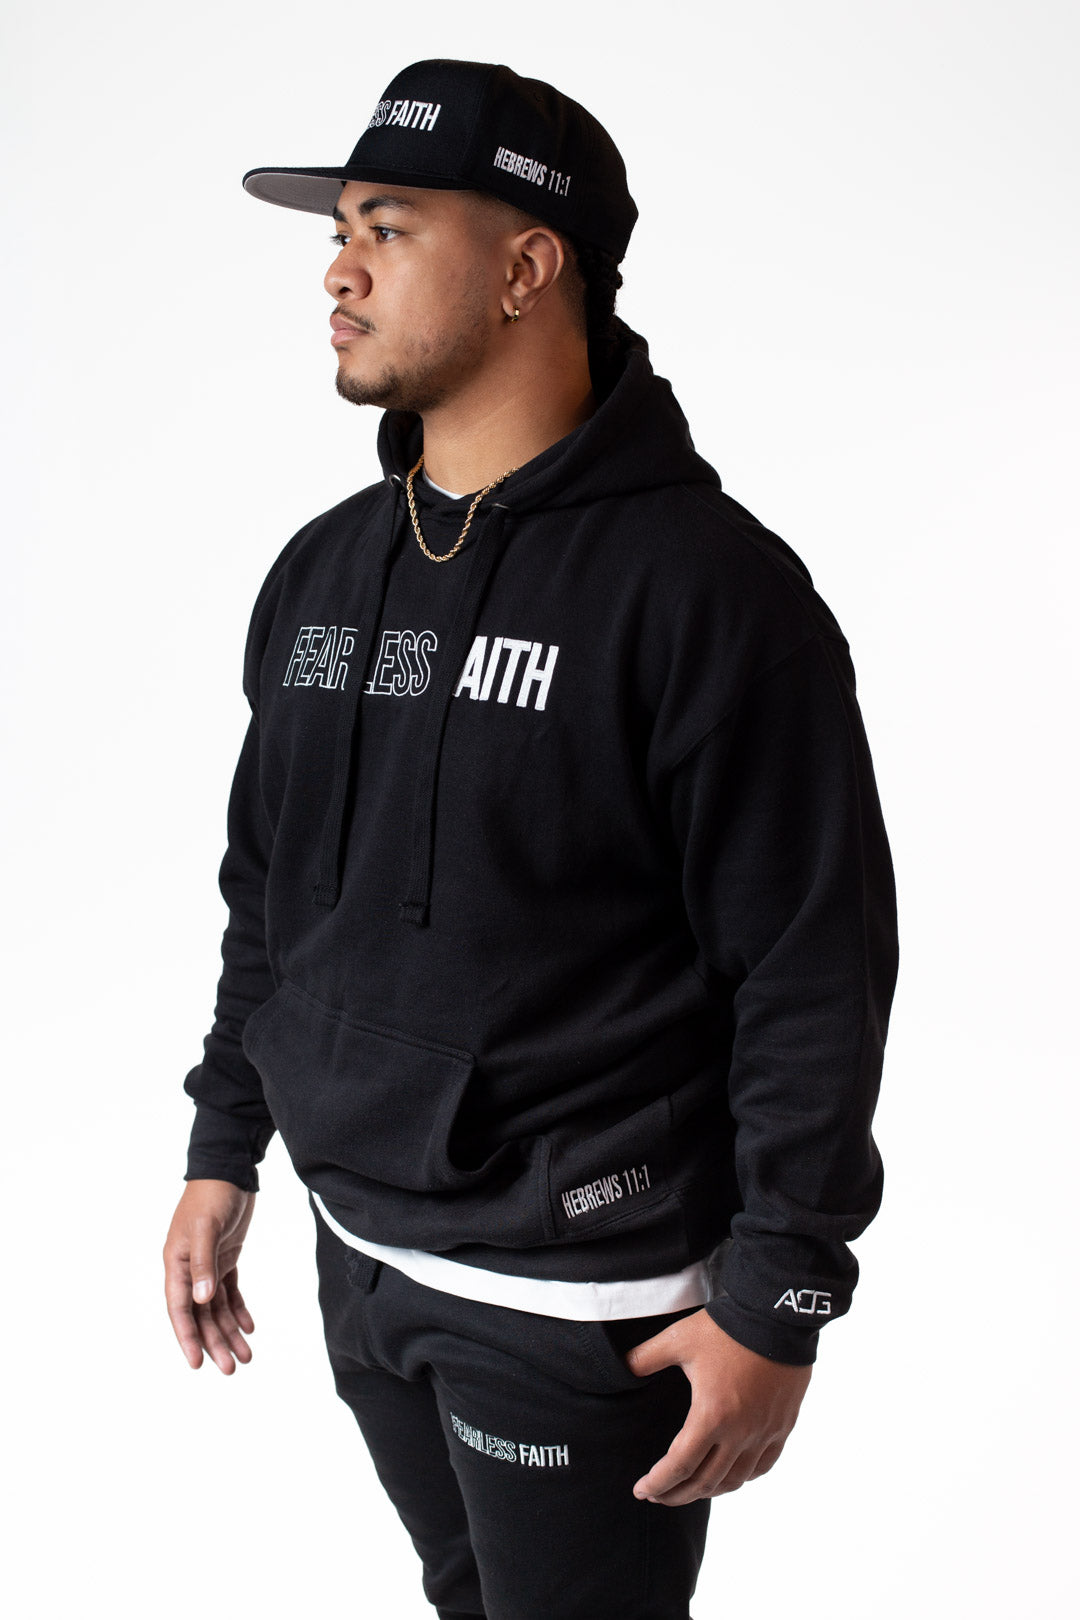 Fearless Faith Black Hoodie - Embroidered